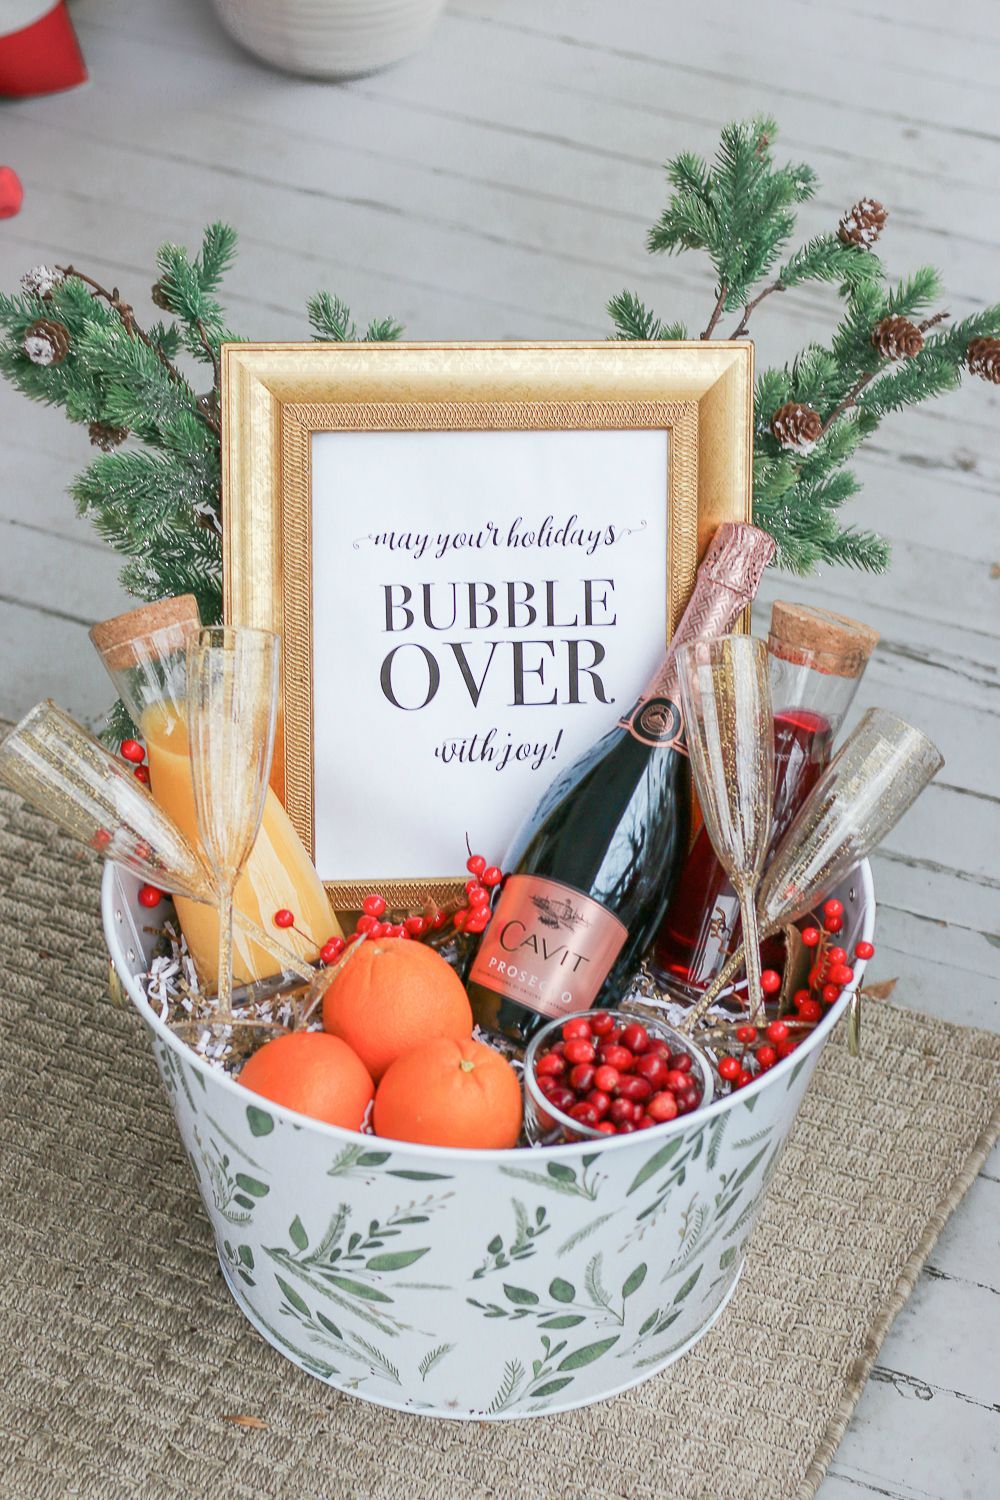 Best First Anniversary Gift Ideas For Him  Gift Baskets